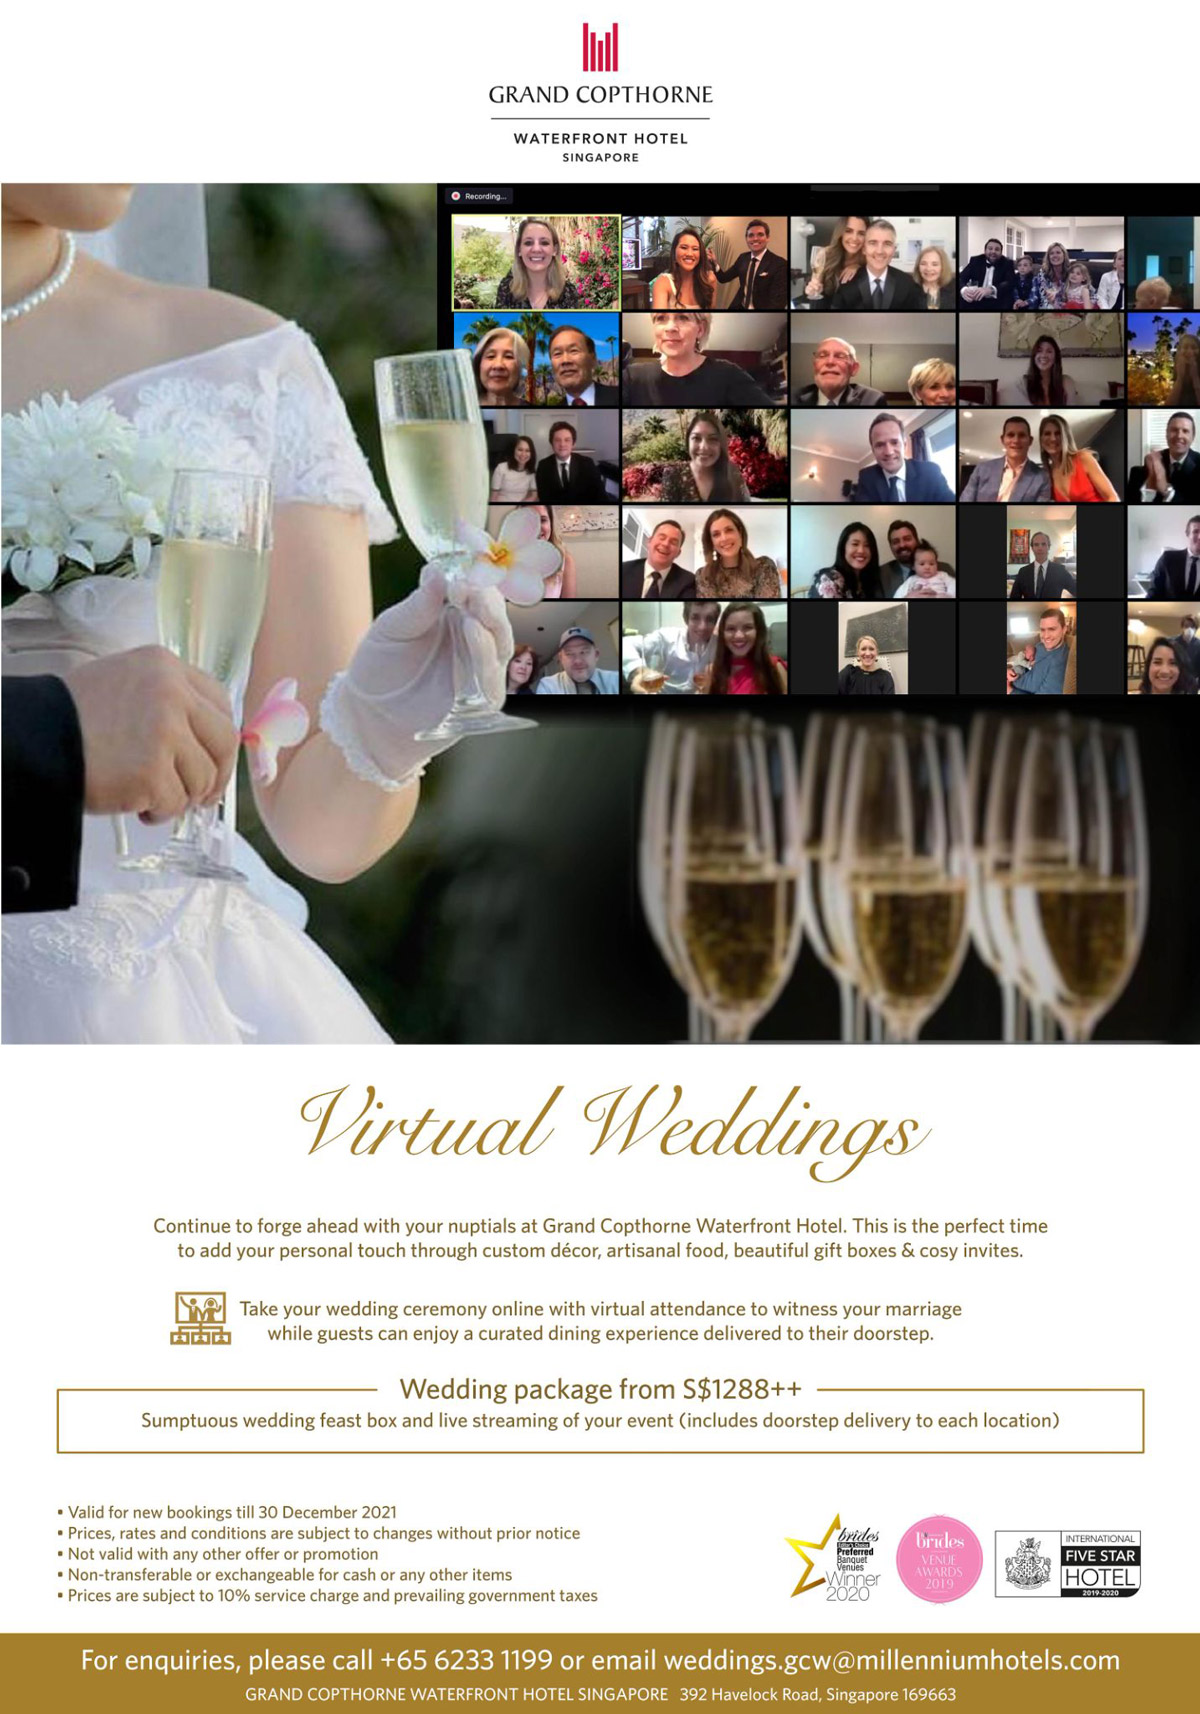 Riverside Romance: Weddings with Grand Copthorne Waterfront Hotel